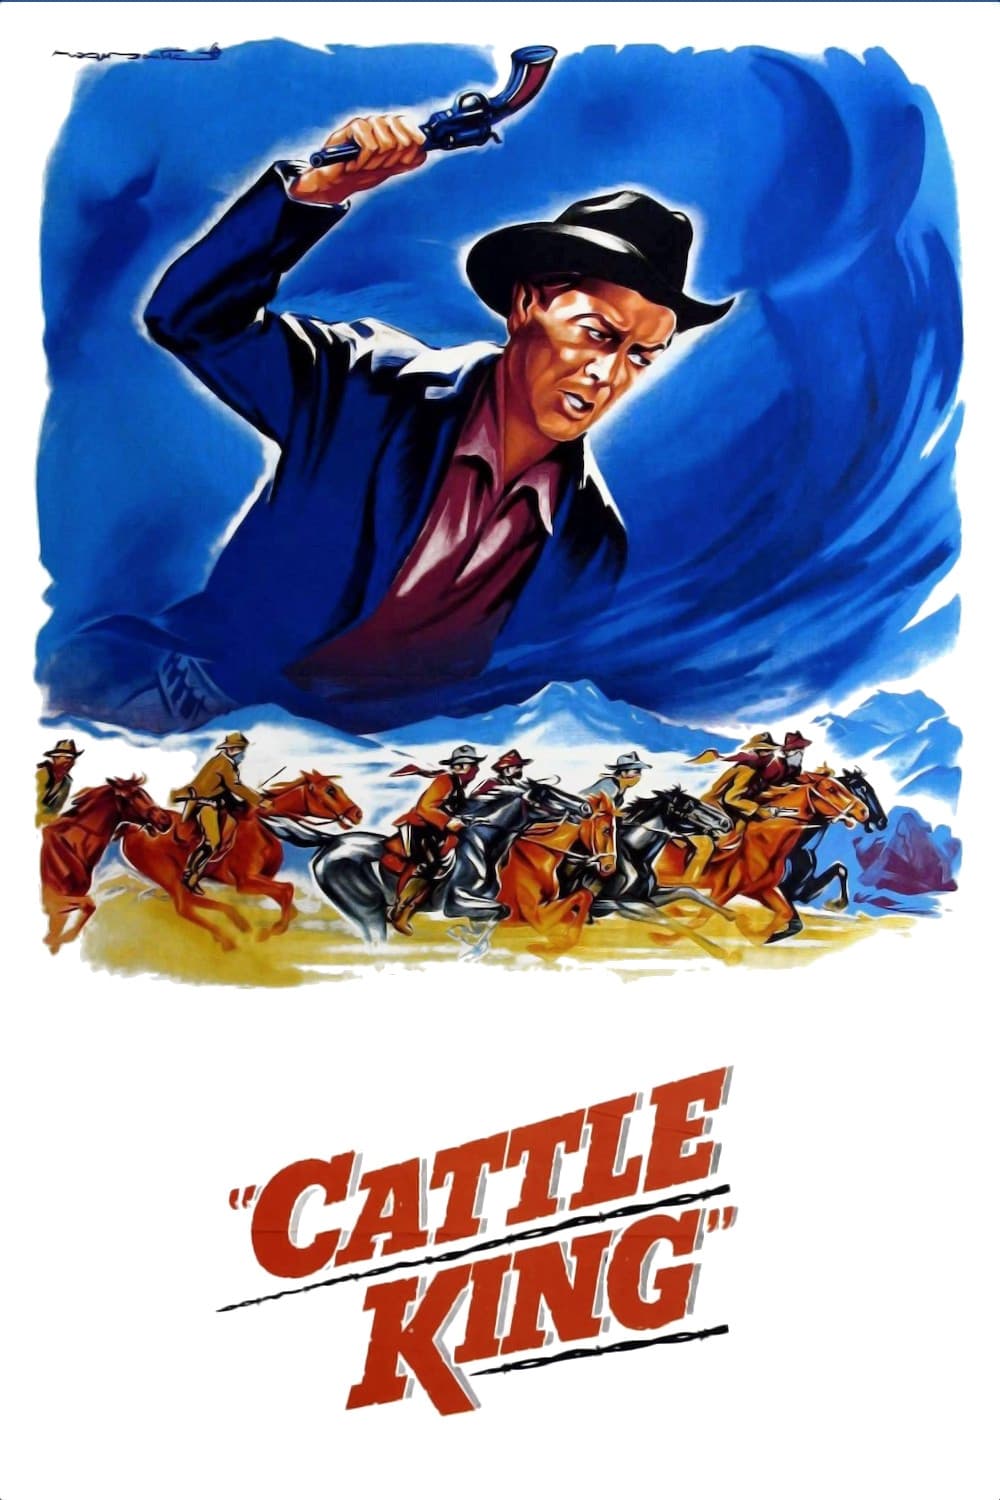 Cattle King (1963)